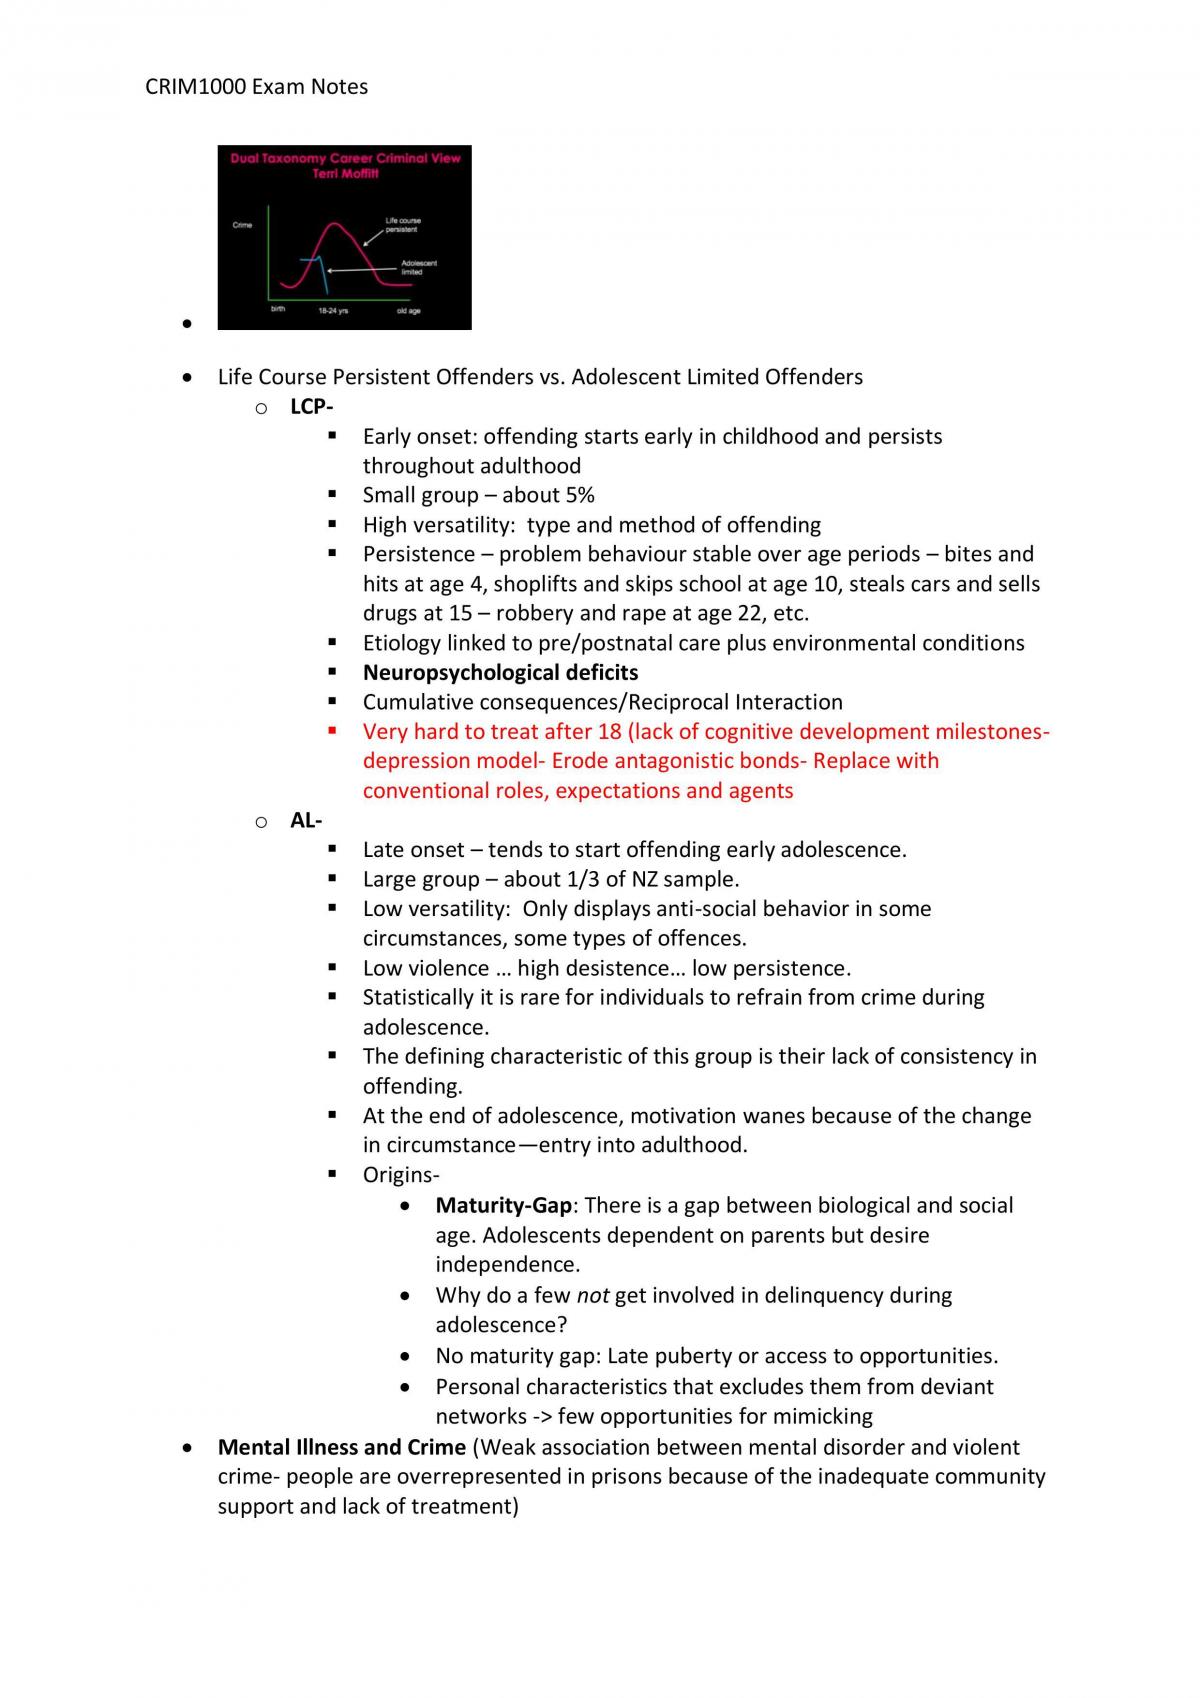 CRIM1000 Complete Study Notes - Page 16